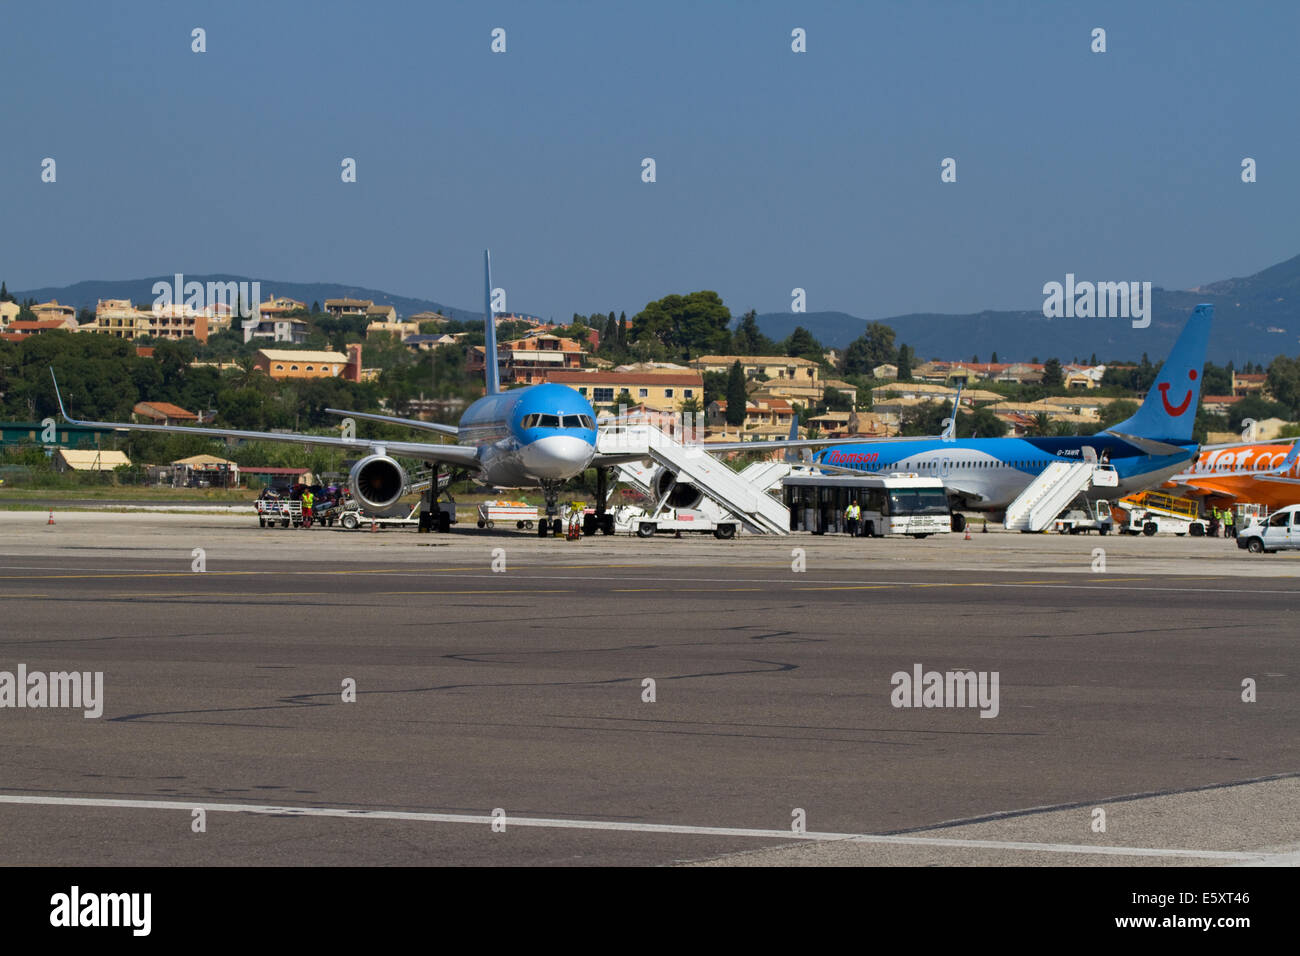 Airliners at Corfu Airport Stock Photo